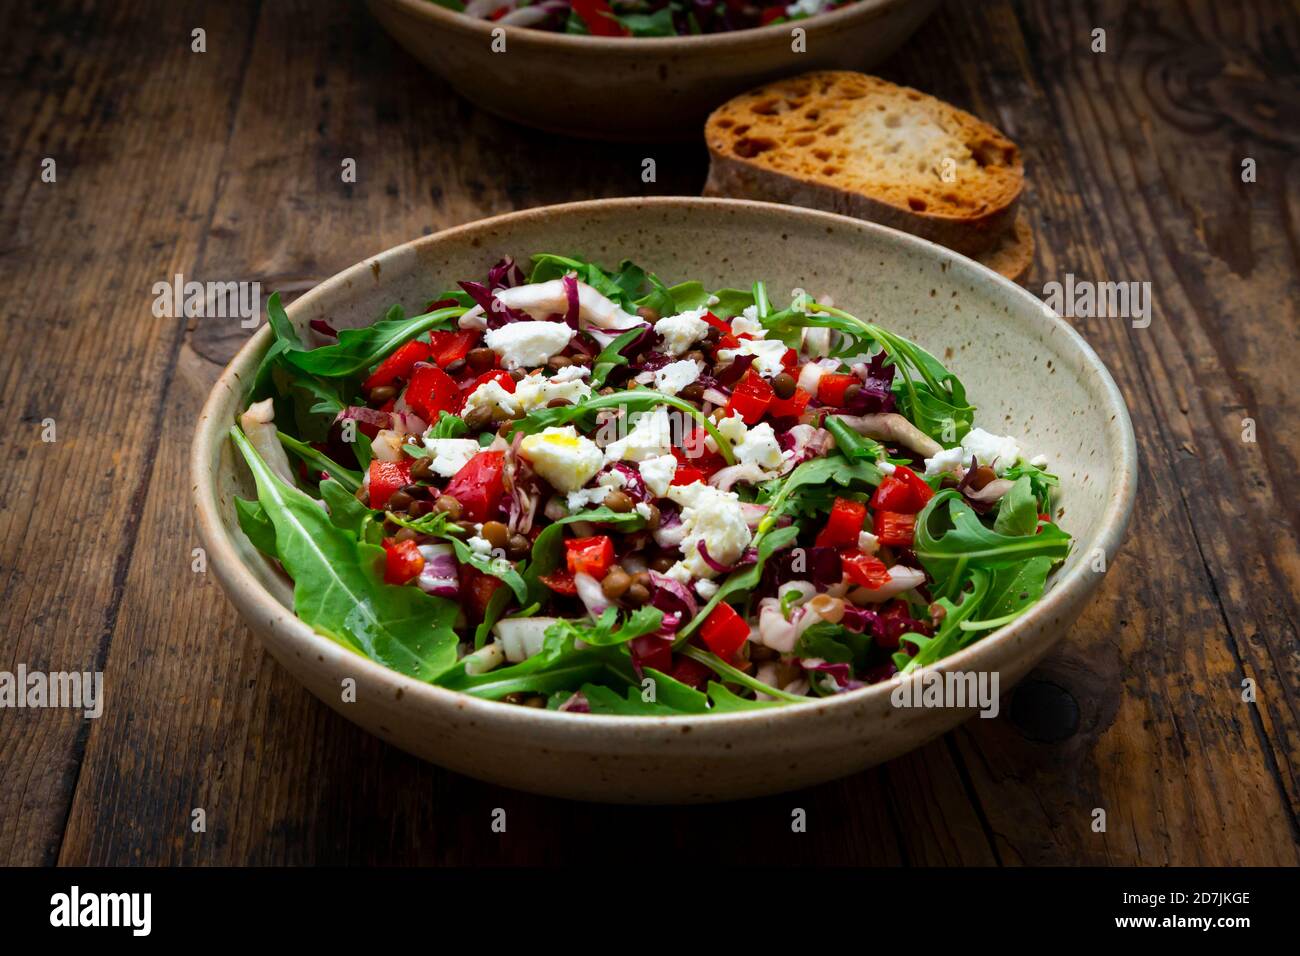 Bowl of vegetable salad with lentils, arugula, red bell pepper, feta cheese and radicchio Stock Photo